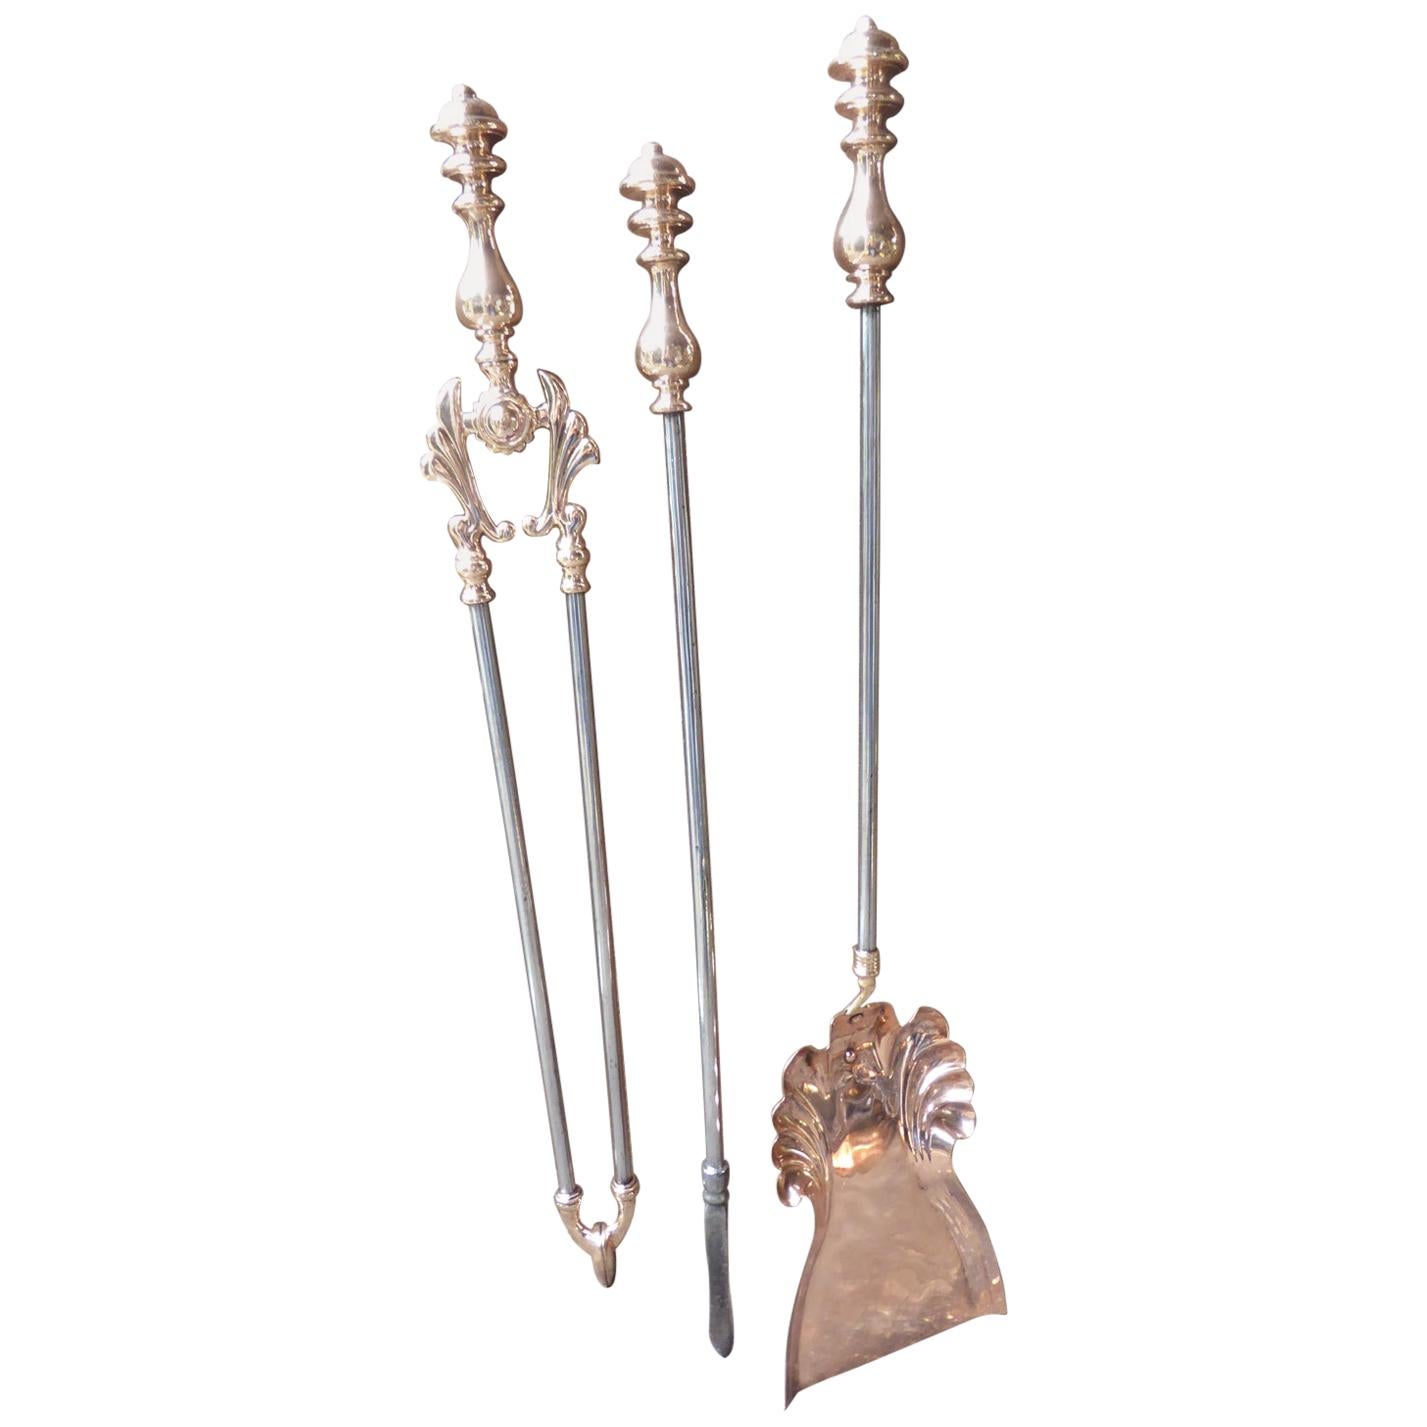 English Art Nouveau Fireplace Tools or Fire Tools, Early 20th Century